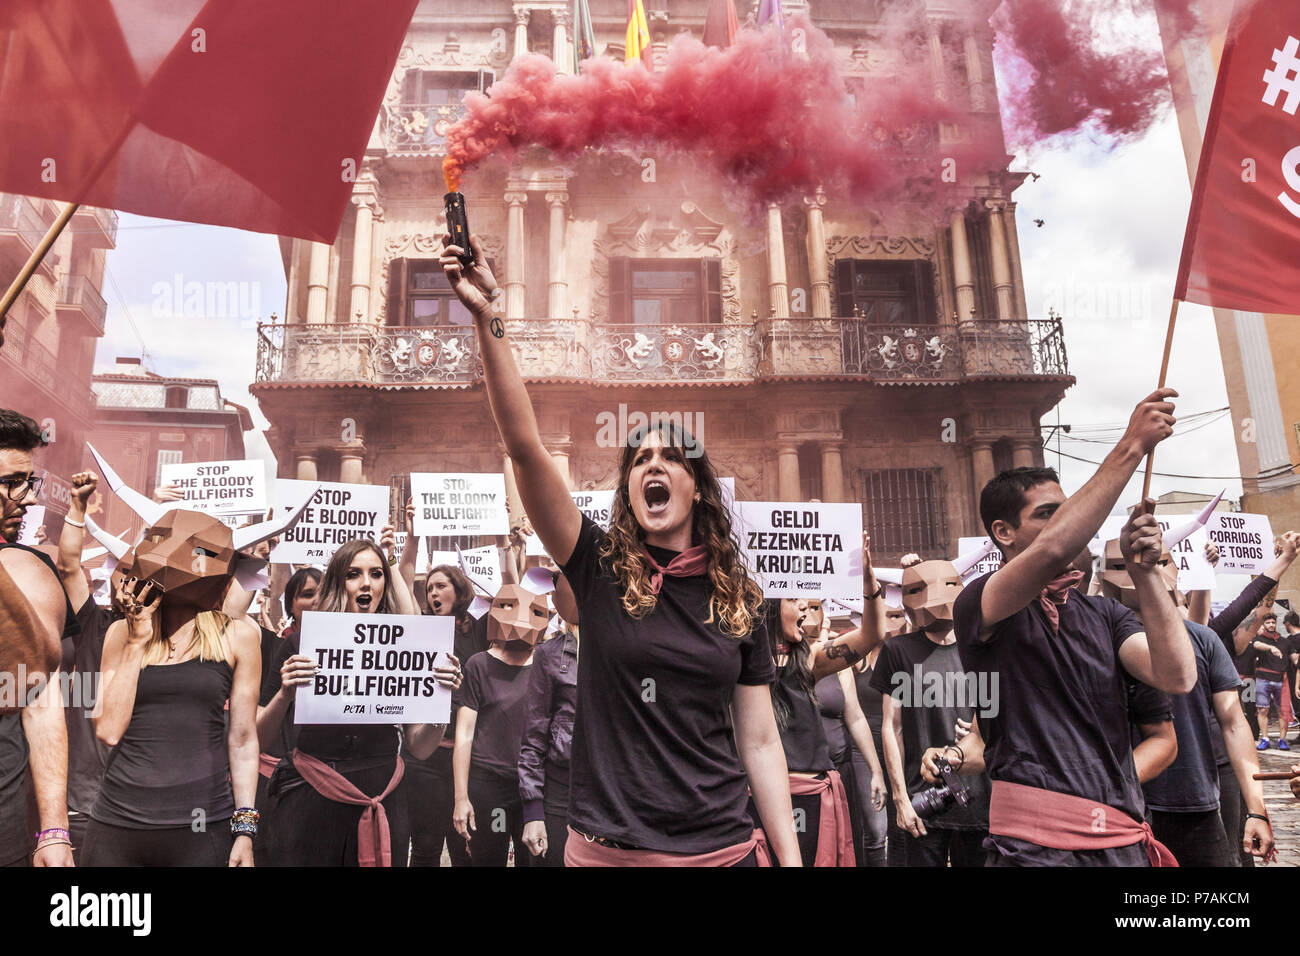 Pamplona, Navarra, Spain. 5th July, 2018. Protest against animal cruelty in bull fightings before San Fermin celebrations in Pamplona, Spain. Credit: Celestino Arce/ZUMA Wire/Alamy Live News Stock Photo